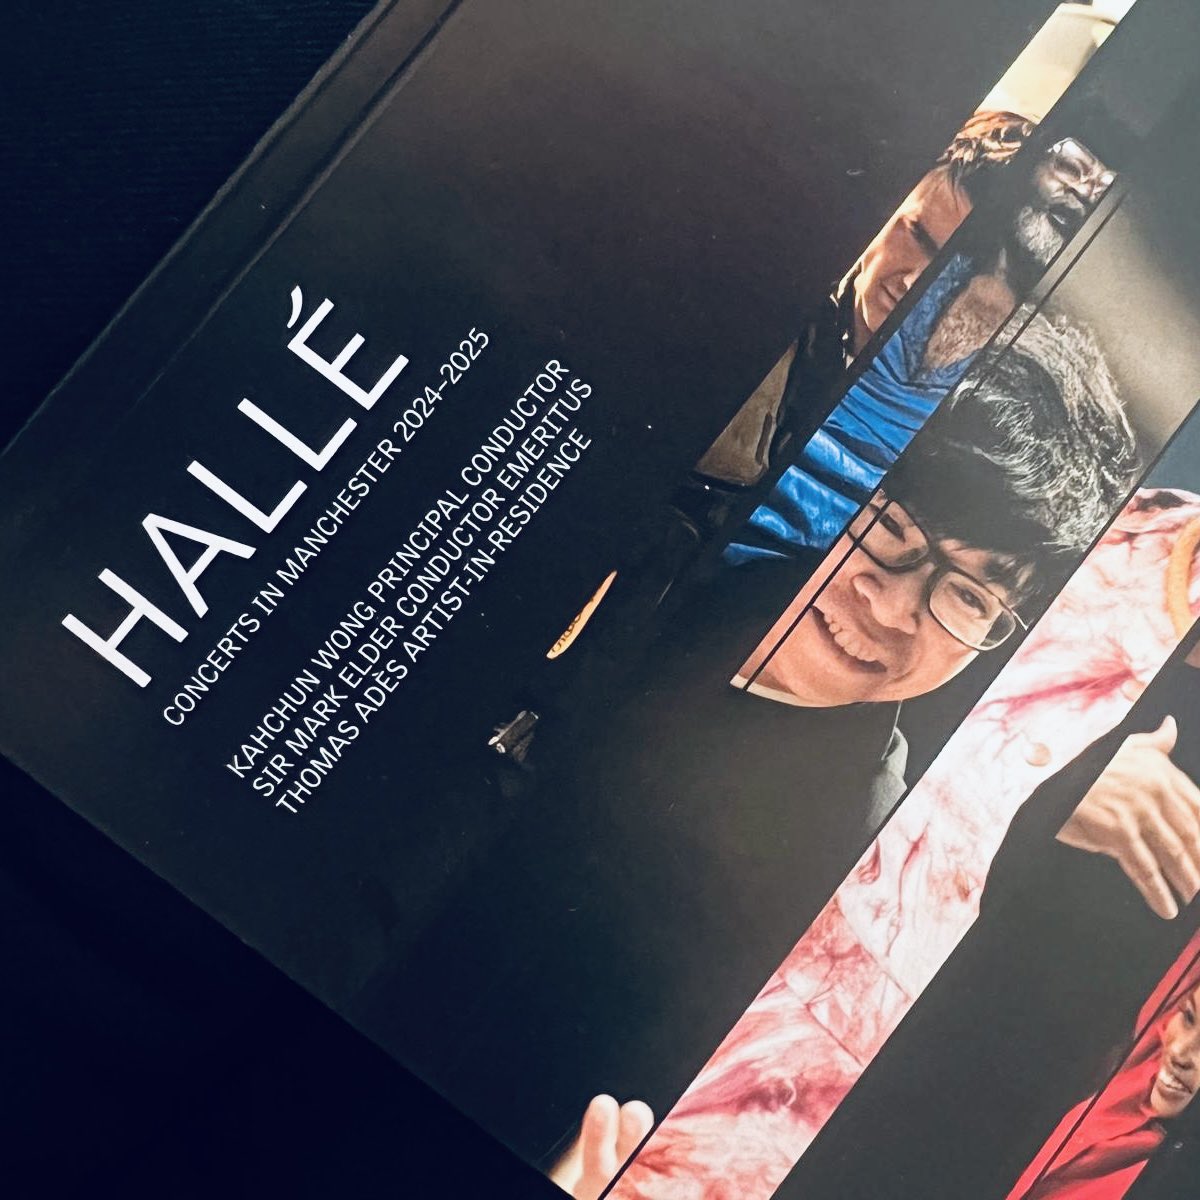 Fun concerts ahead for us next season with @the_halle including pieces by #Boulanger, #Adès and #Saariaho. We’re also singing favourites #Beethoven 9 and #Mahler 2 with new Principal Conductor @kahchun_music. 📖 issuu.com/thehalle/docs/…